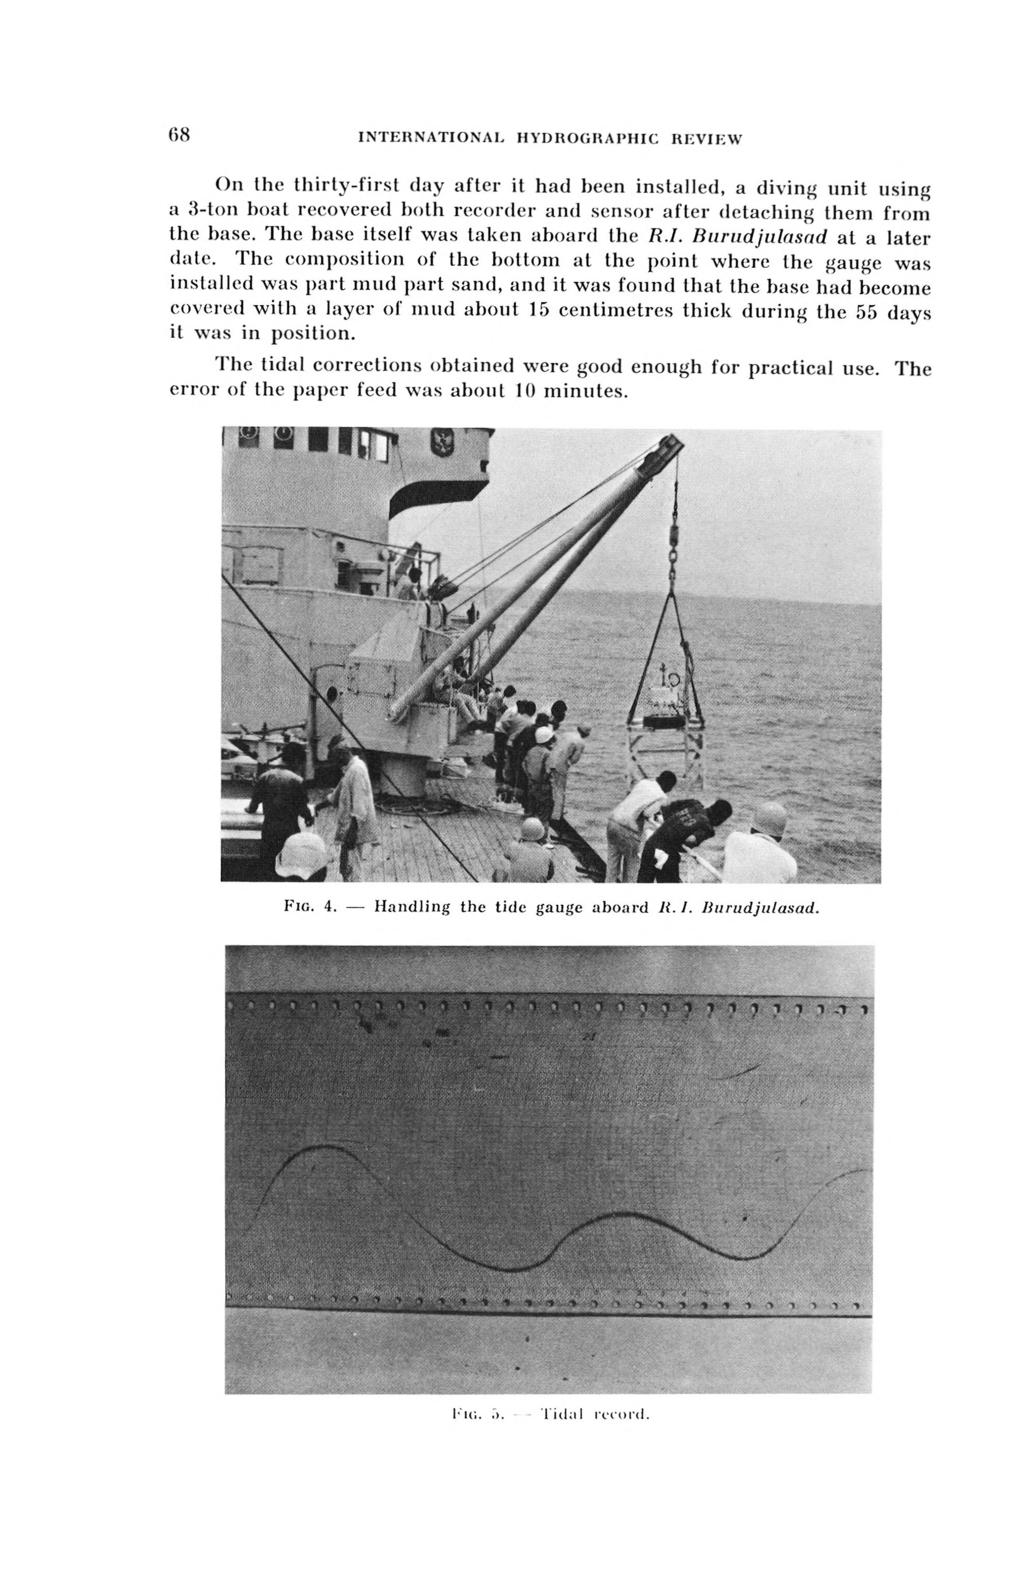 On I he thirty-first day after it had been installed, a diving unit using a 3-ton boat recovered both recorder and sensor after detaching them from the base. The base itself was taken aboard the R.I. Burudjulasnd at a later date.